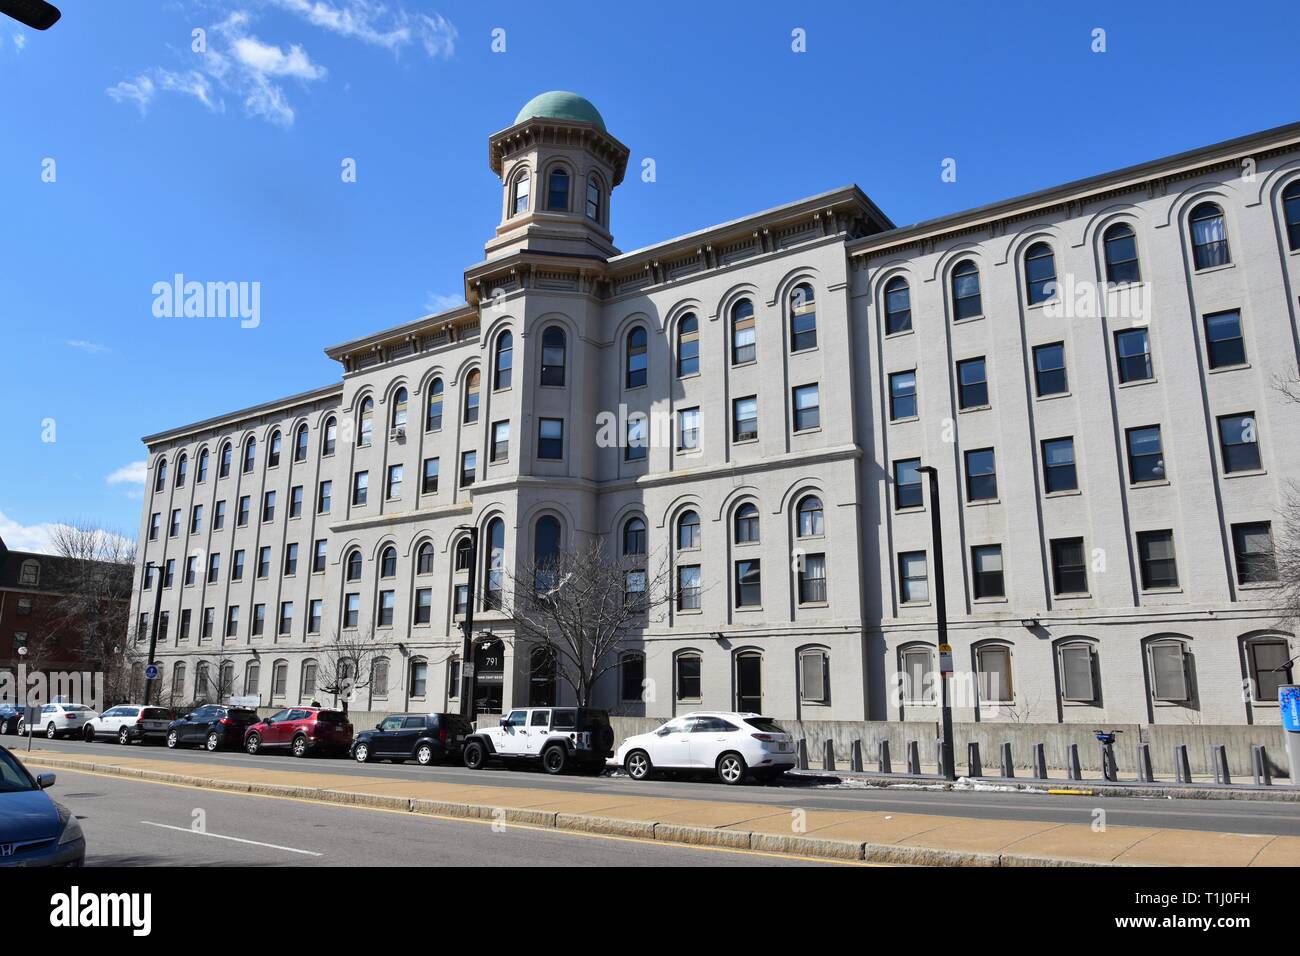 The historic Chickering Piano Factory, once one of the largest buildings in  the U.S., located in the South End/Lower Roxbury, Boston, Massachusetts  Stock Photo - Alamy